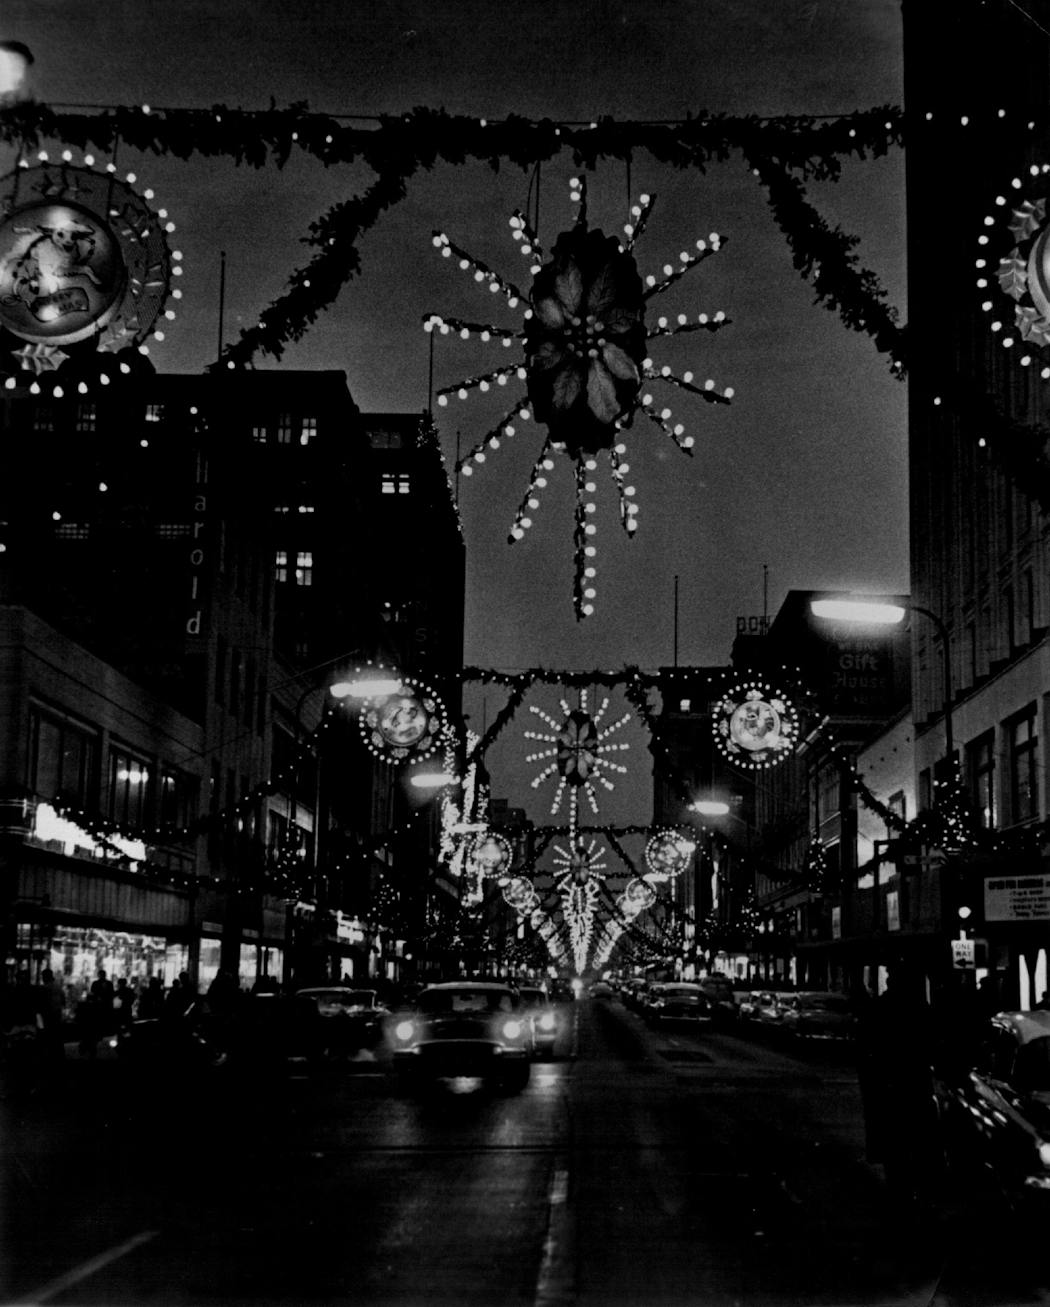 The lights of 1959.